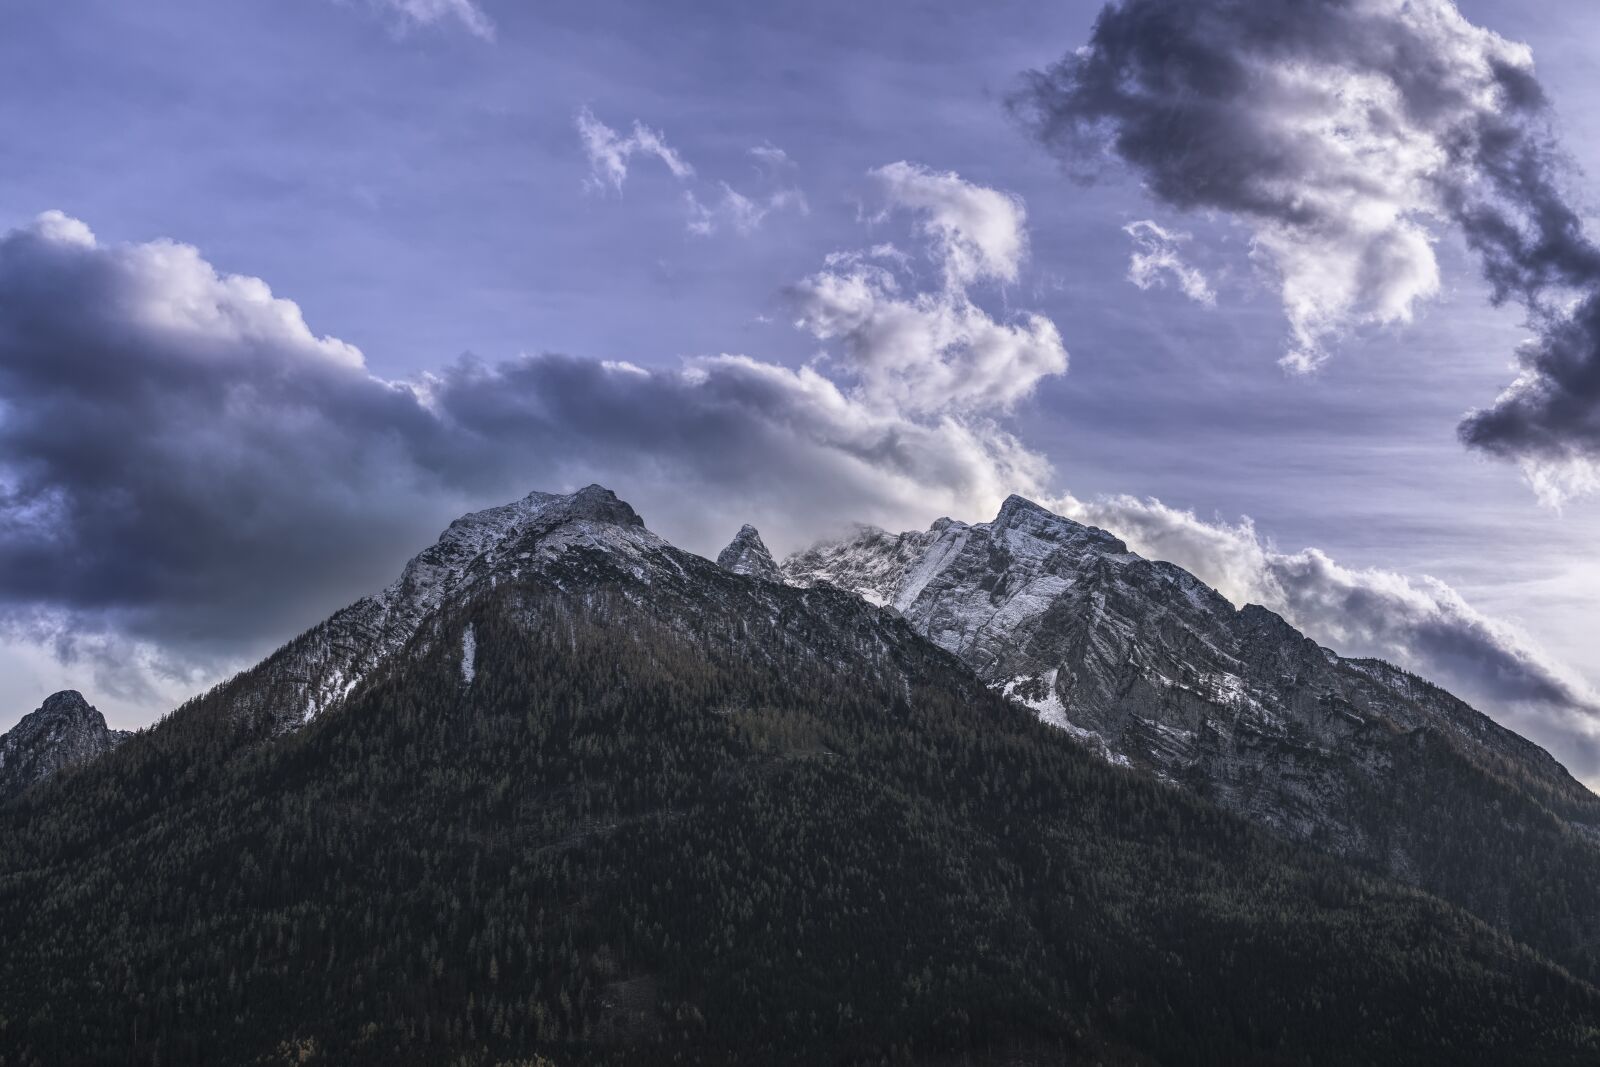 Sony a6300 sample photo. Mountain, abendstimmung, clouds photography